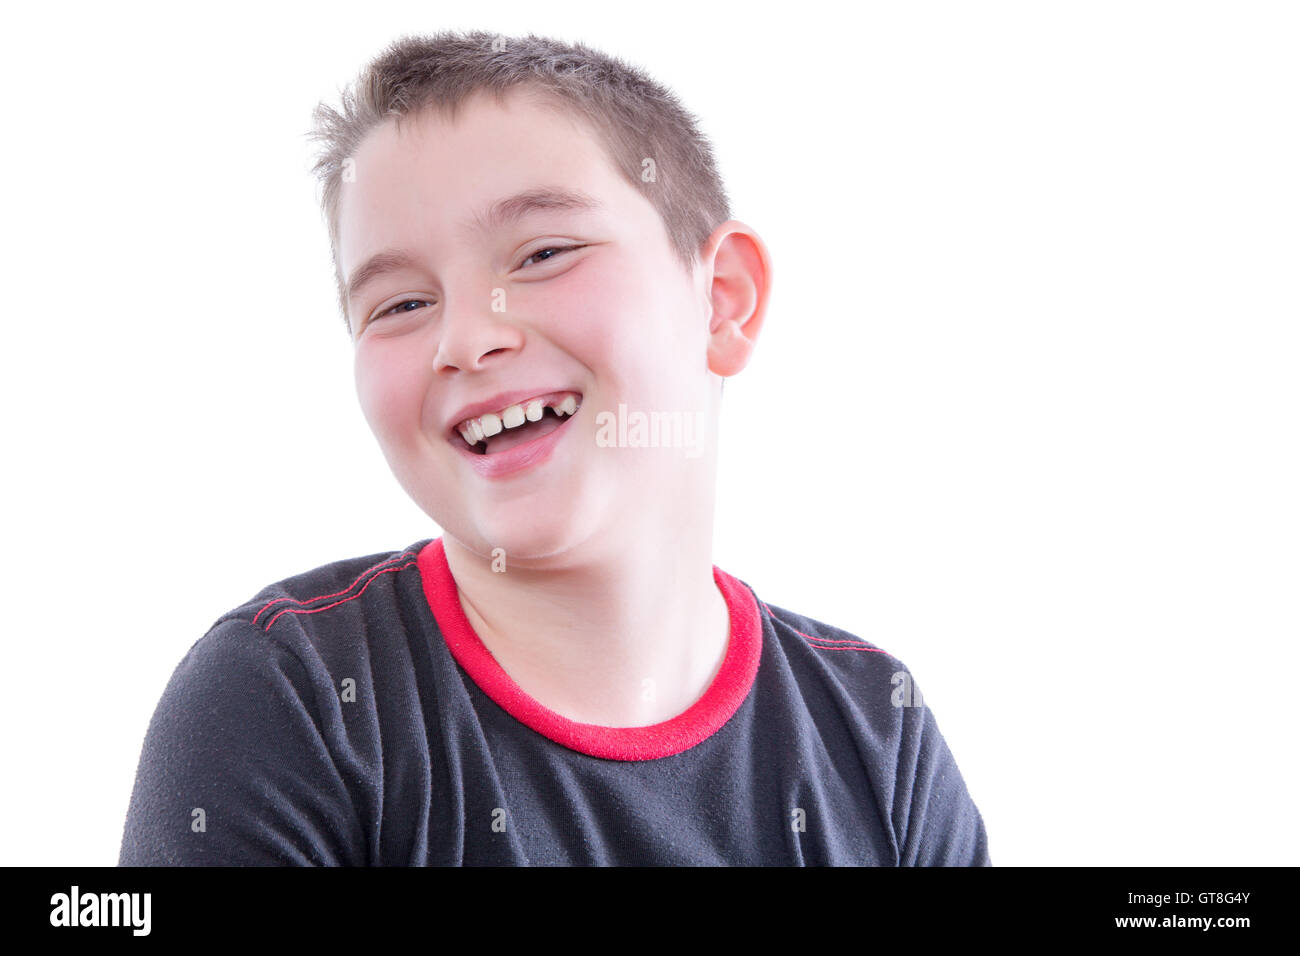 Head and Shoulders Close Up Portrait of Young Boy Wearing Black and Red Shirt Laughing and Showing Braces in Bright Studio with Stock Photo